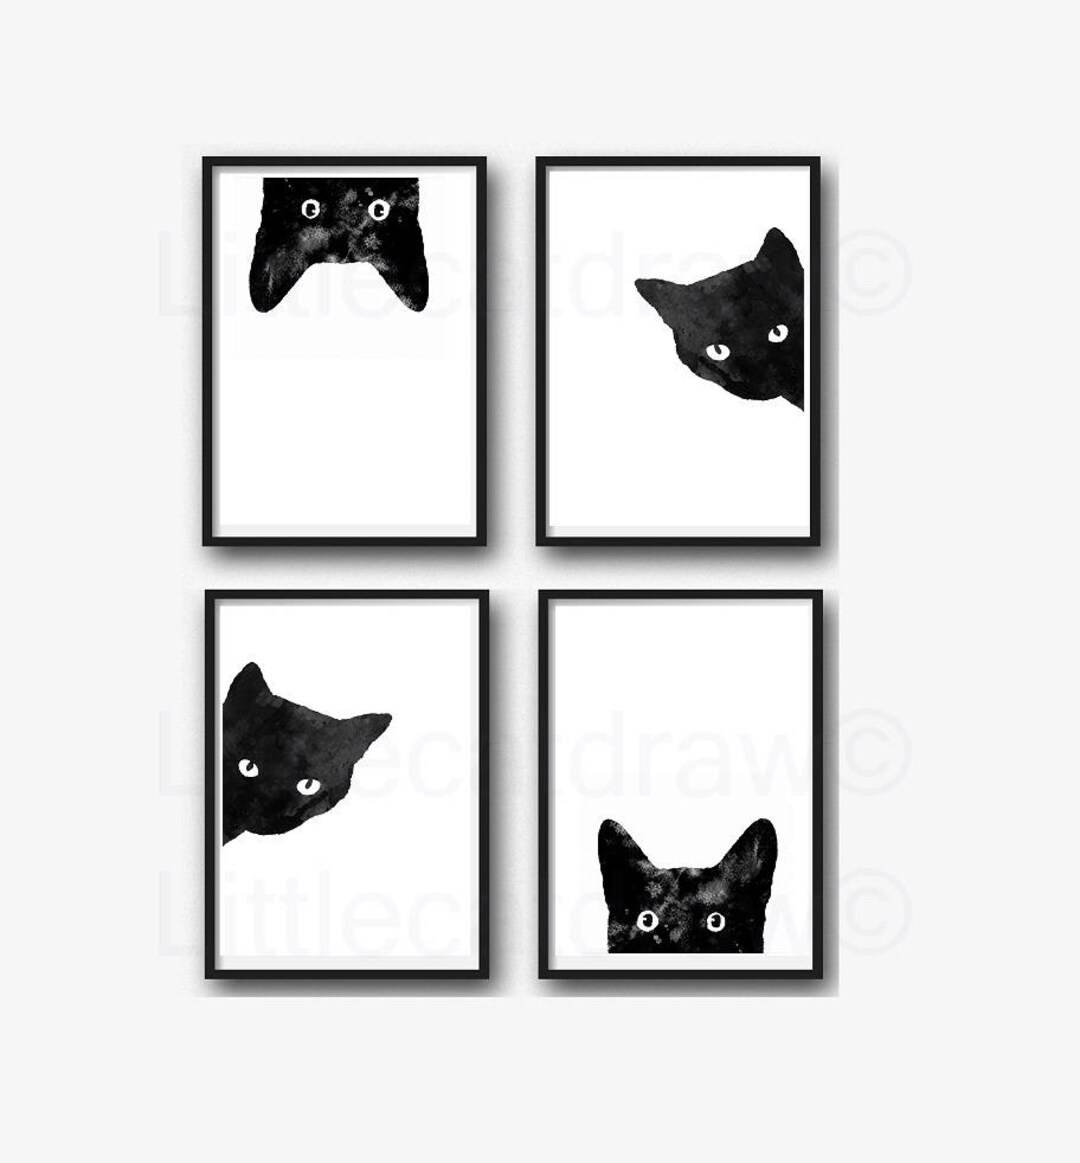 Black Cat in Garden Canvas Print for Sale by aww-to-z